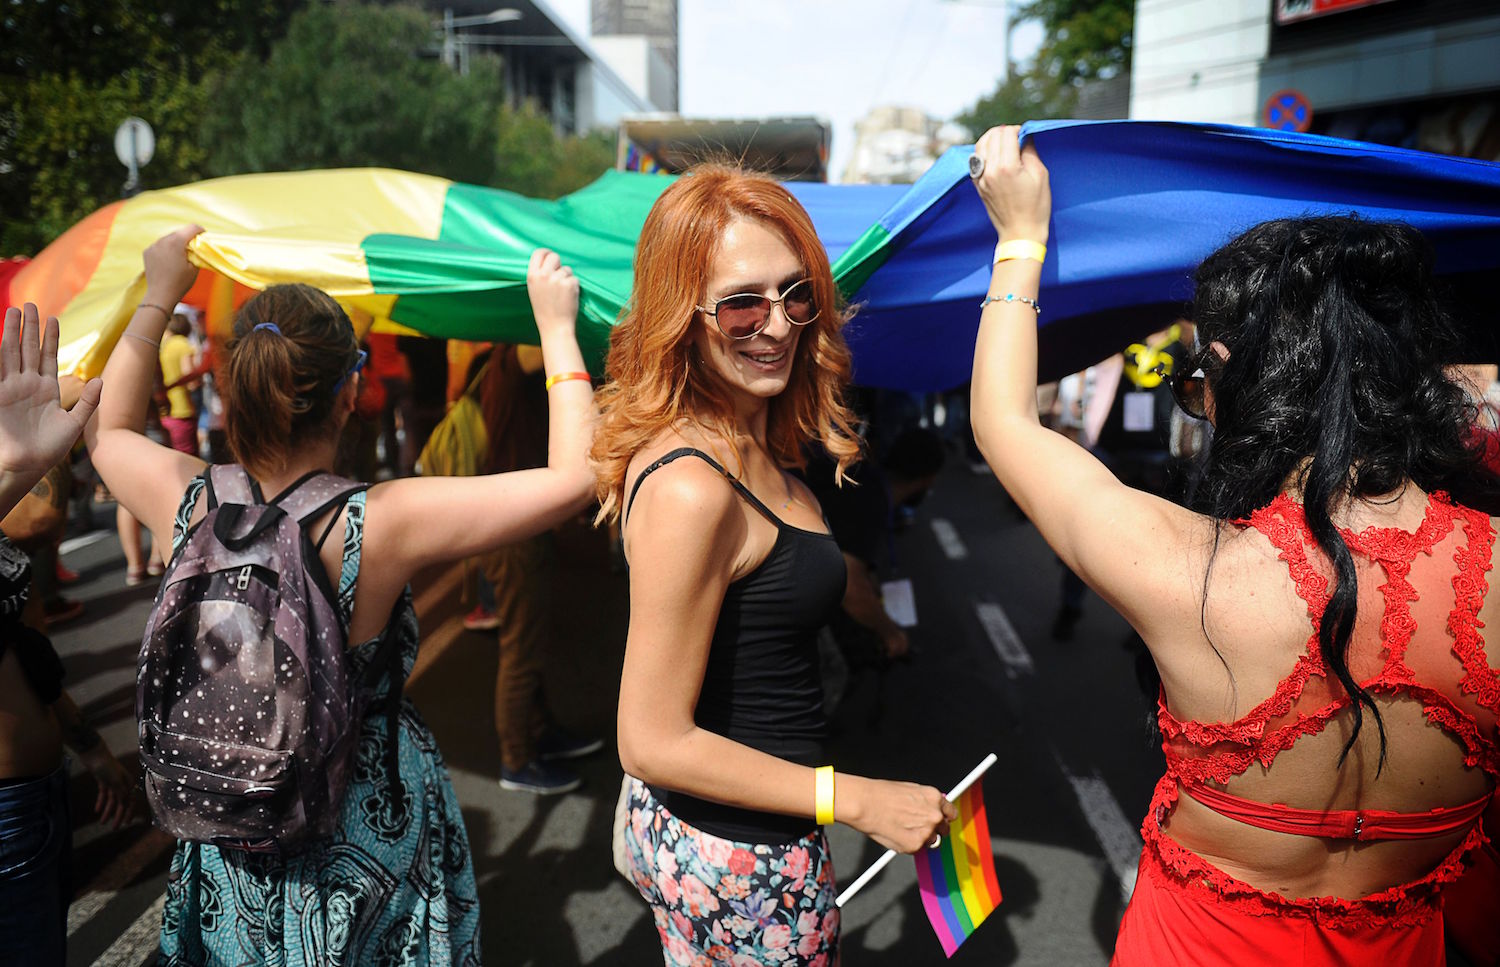 Serbia Pride 2016 (Getty images)